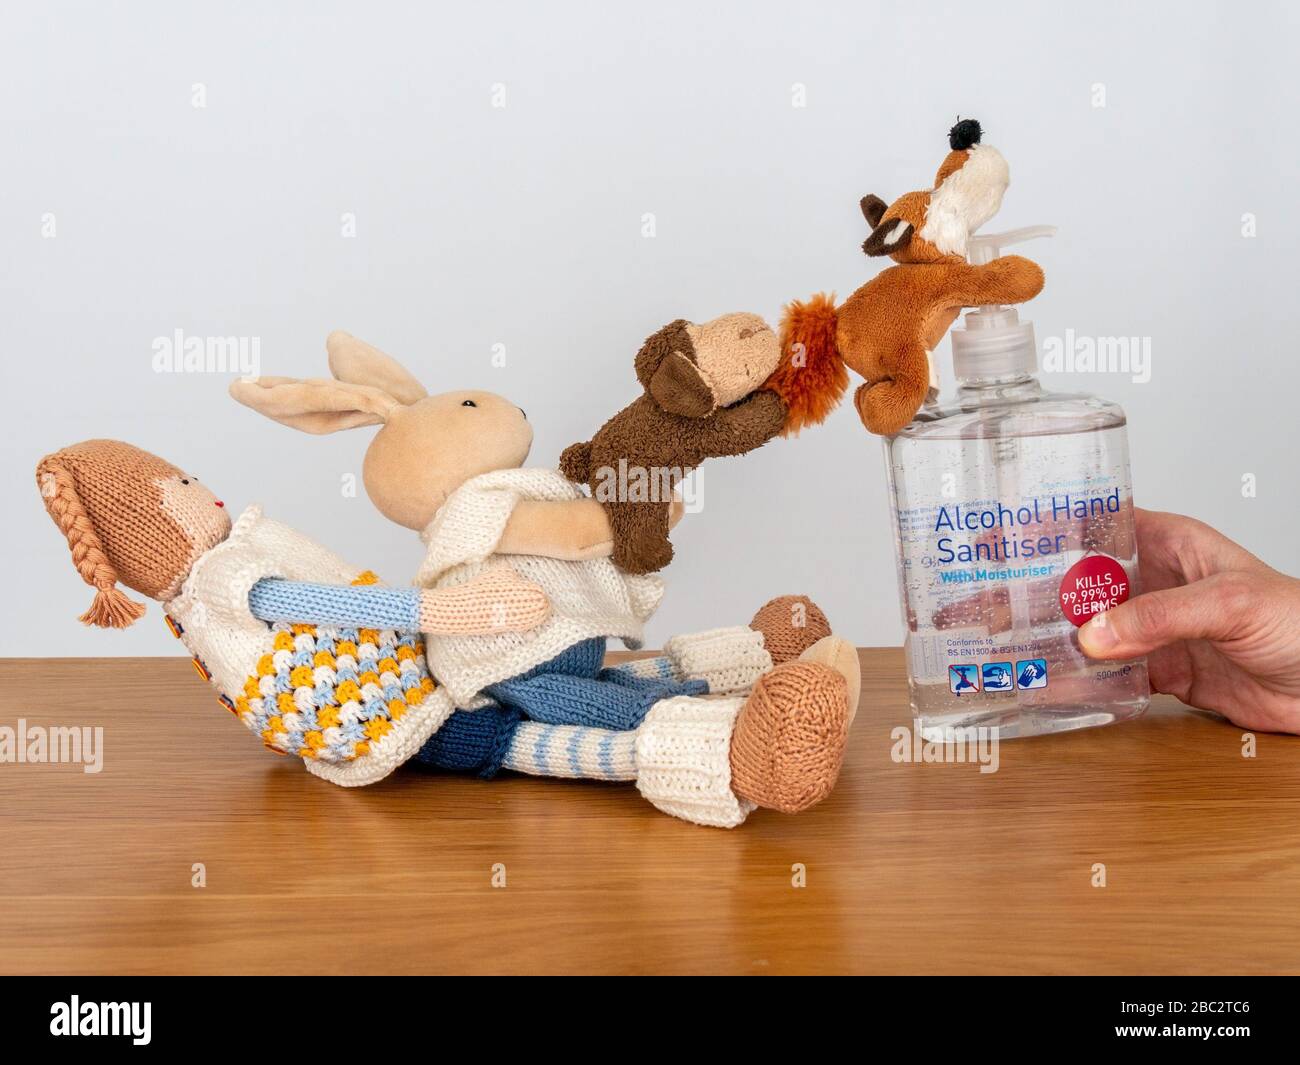 Concept image illustrating hand sanitiser gel shortage as cuddly toys desperately try to hang onto a bottle of hand sanitizer gel. Stock Photo